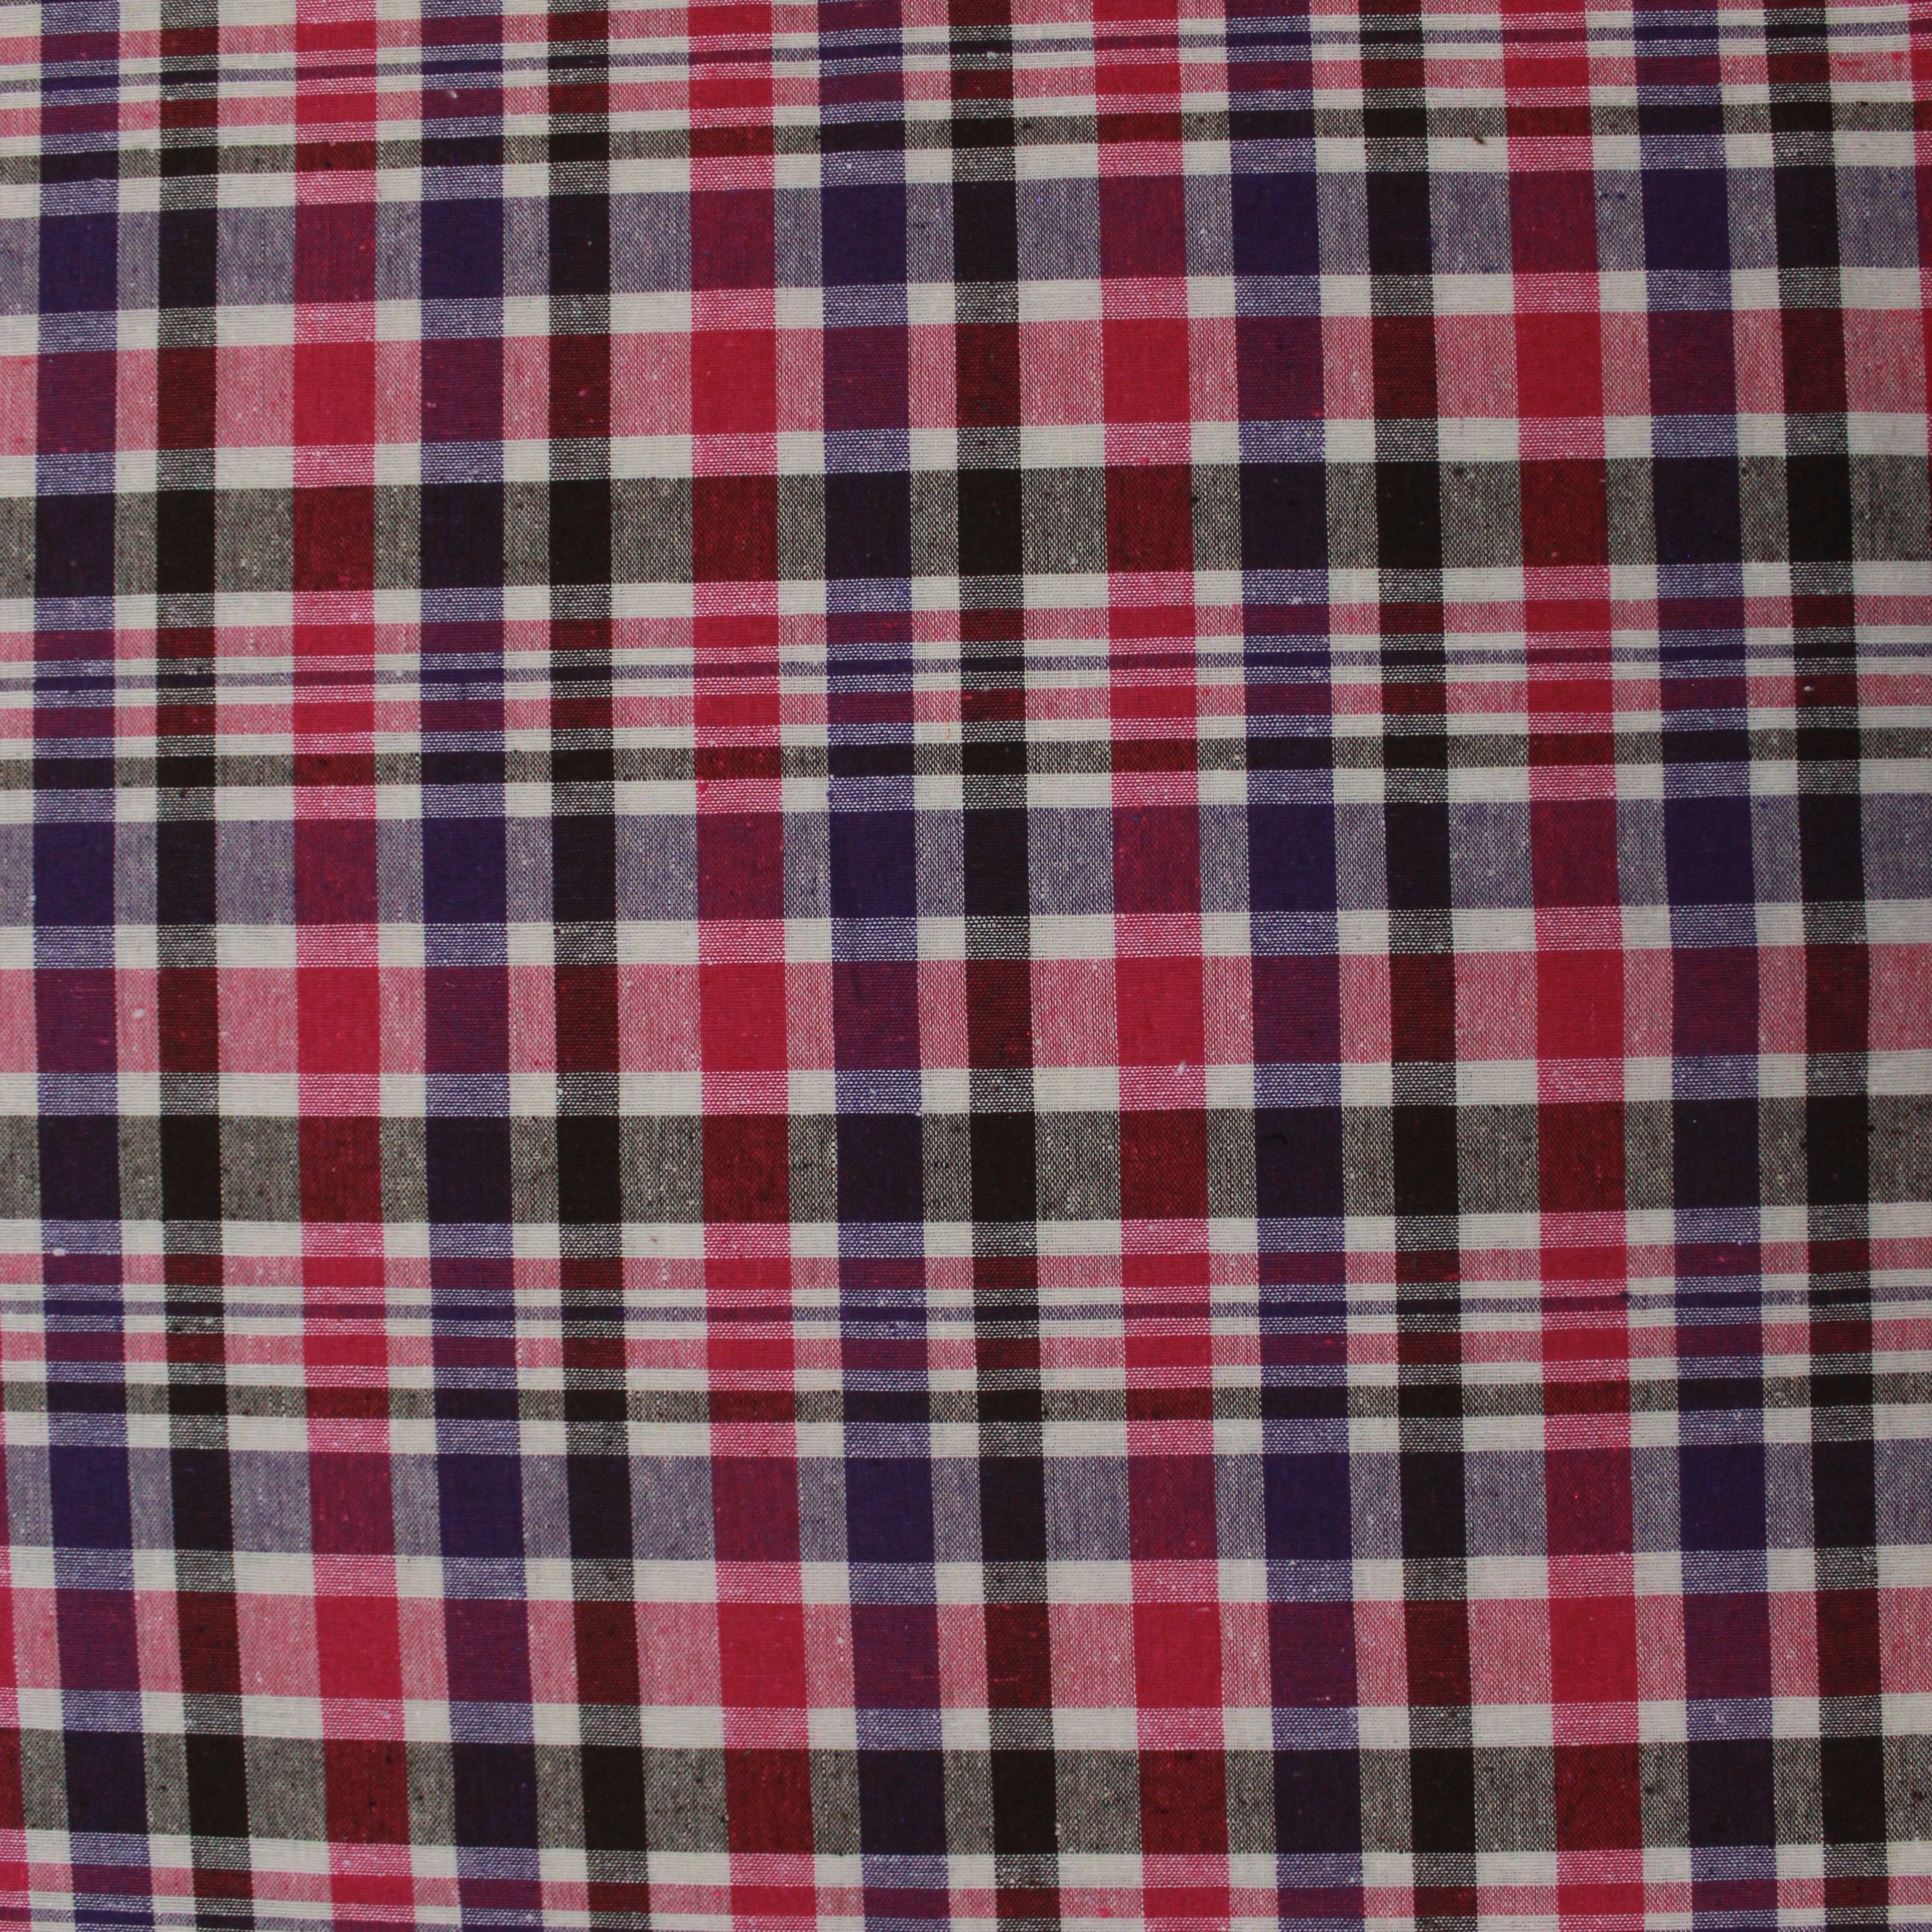 3FOR12 Premium Quality, Fashion Chequered Linen 54" Wide Pink & Brown